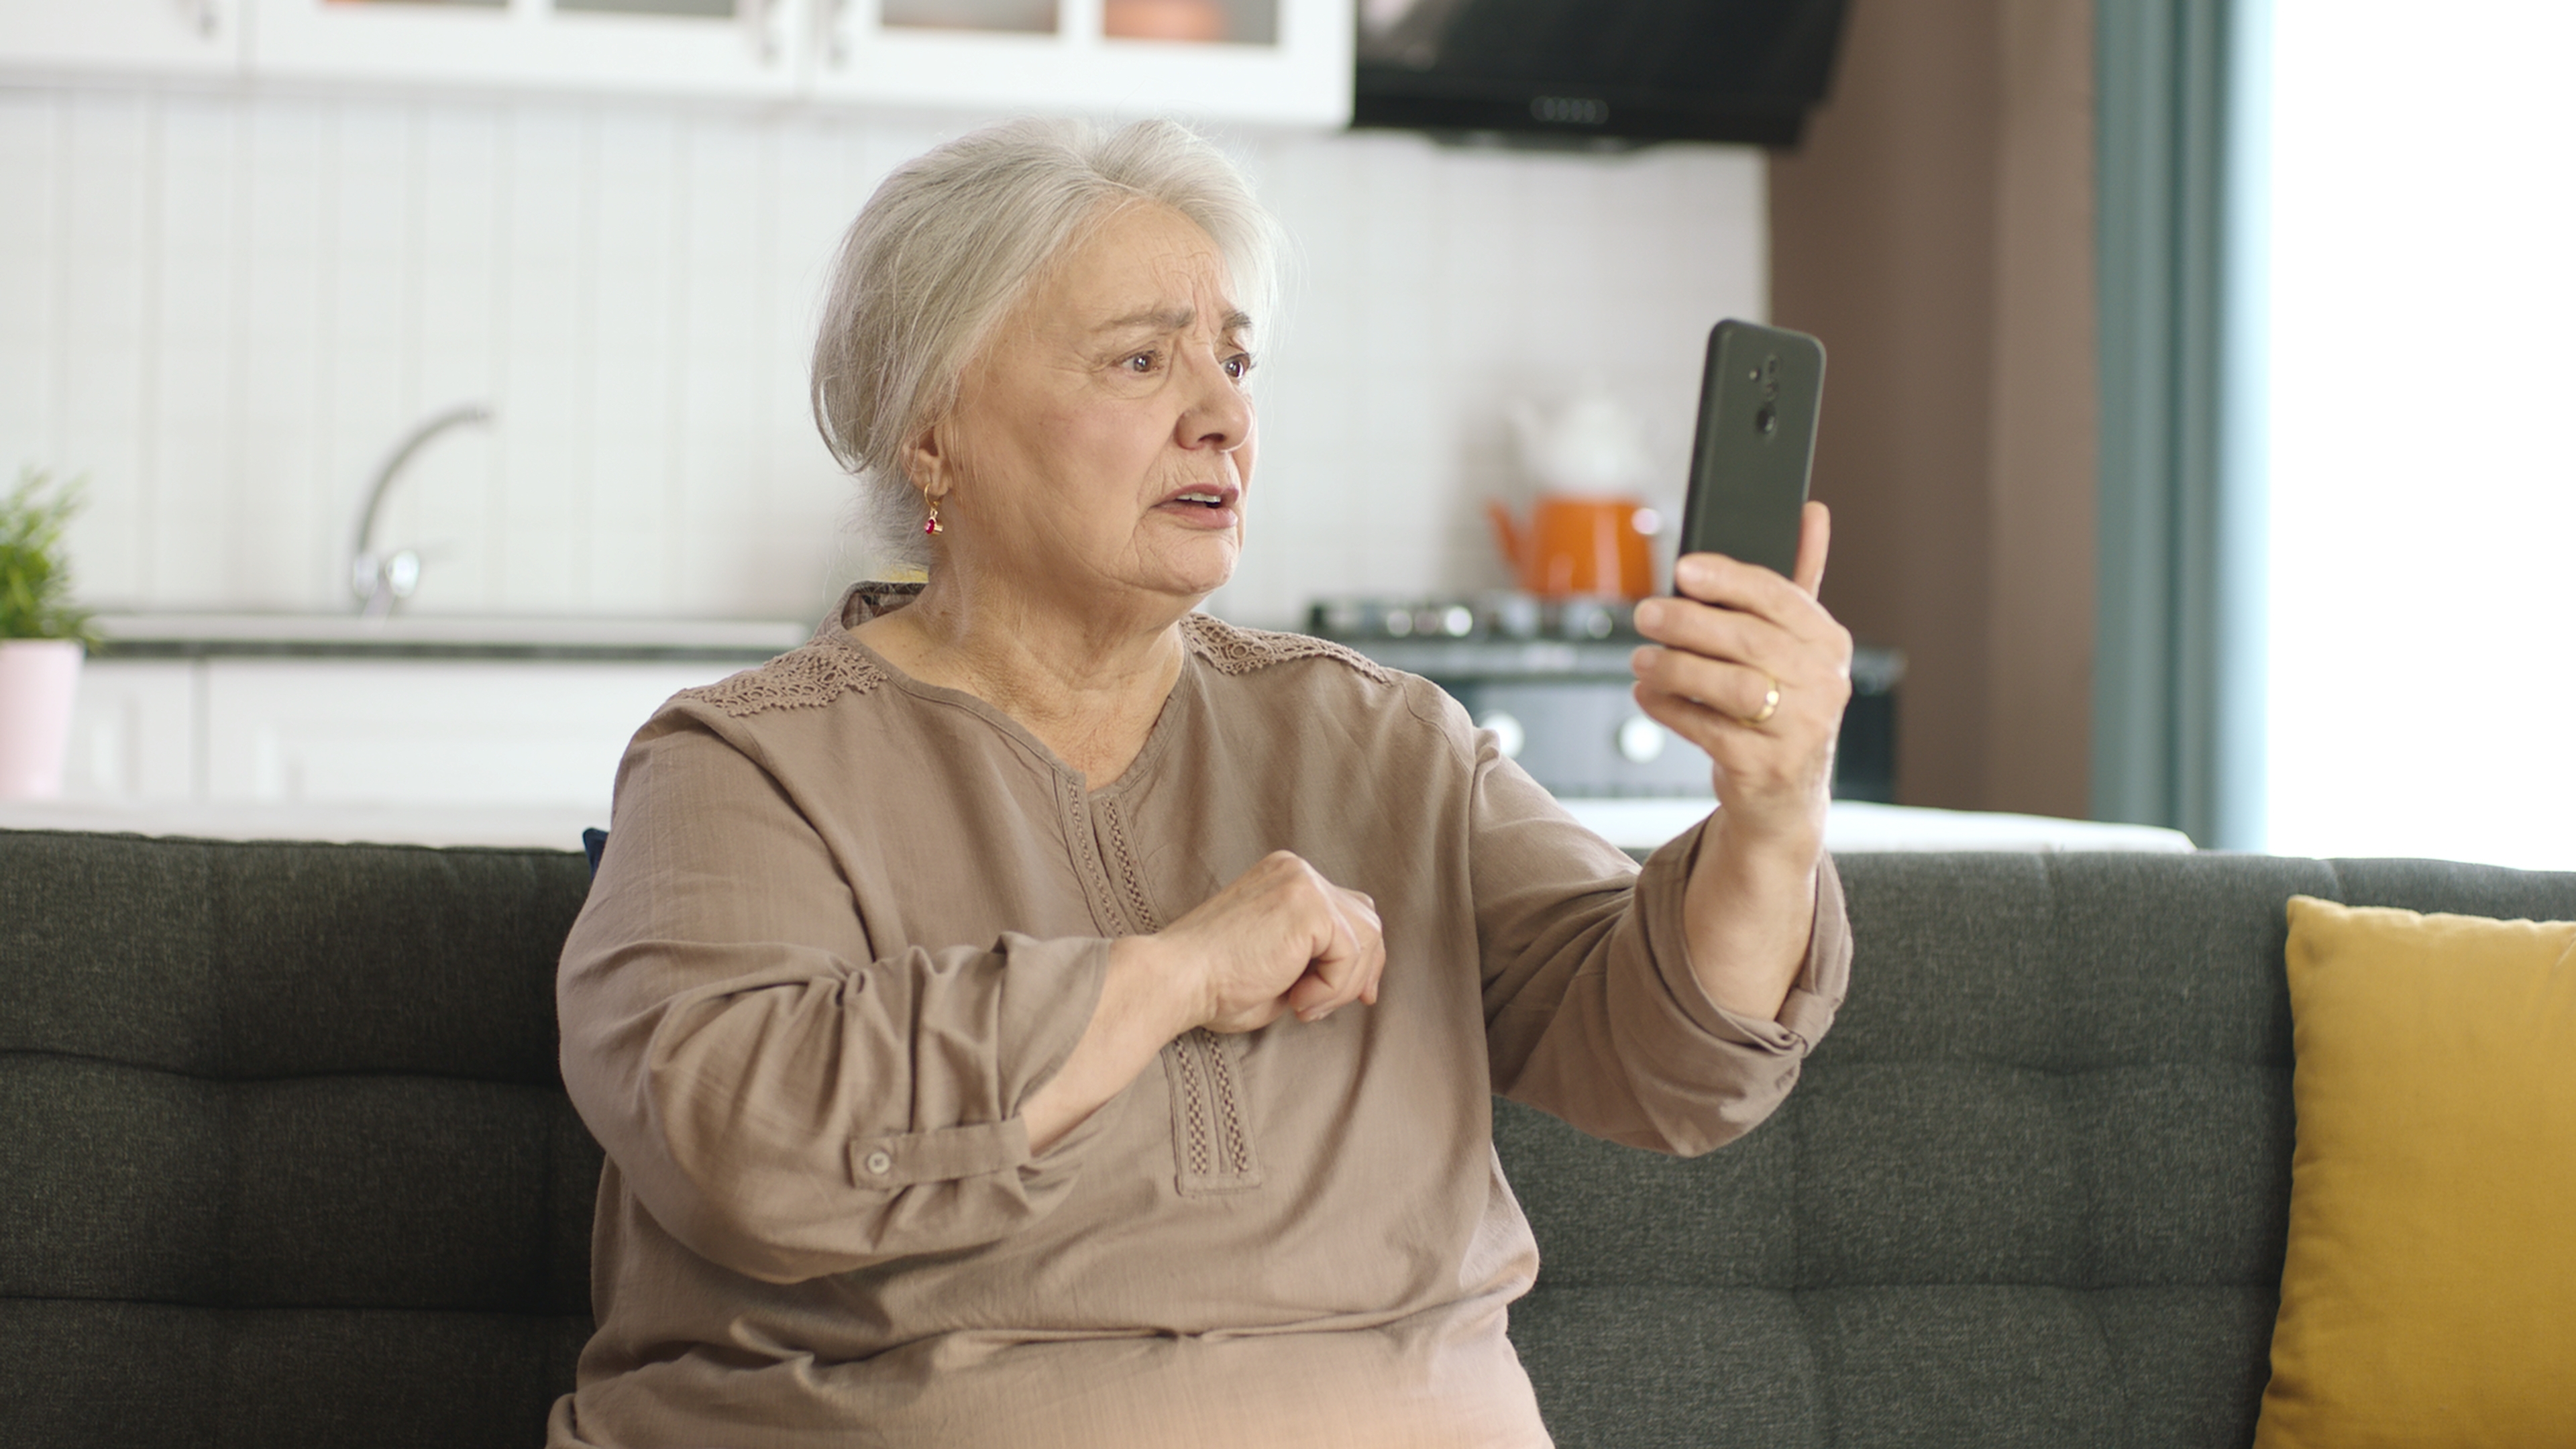 A senior woman looking at her phone | Source: Shutterstock